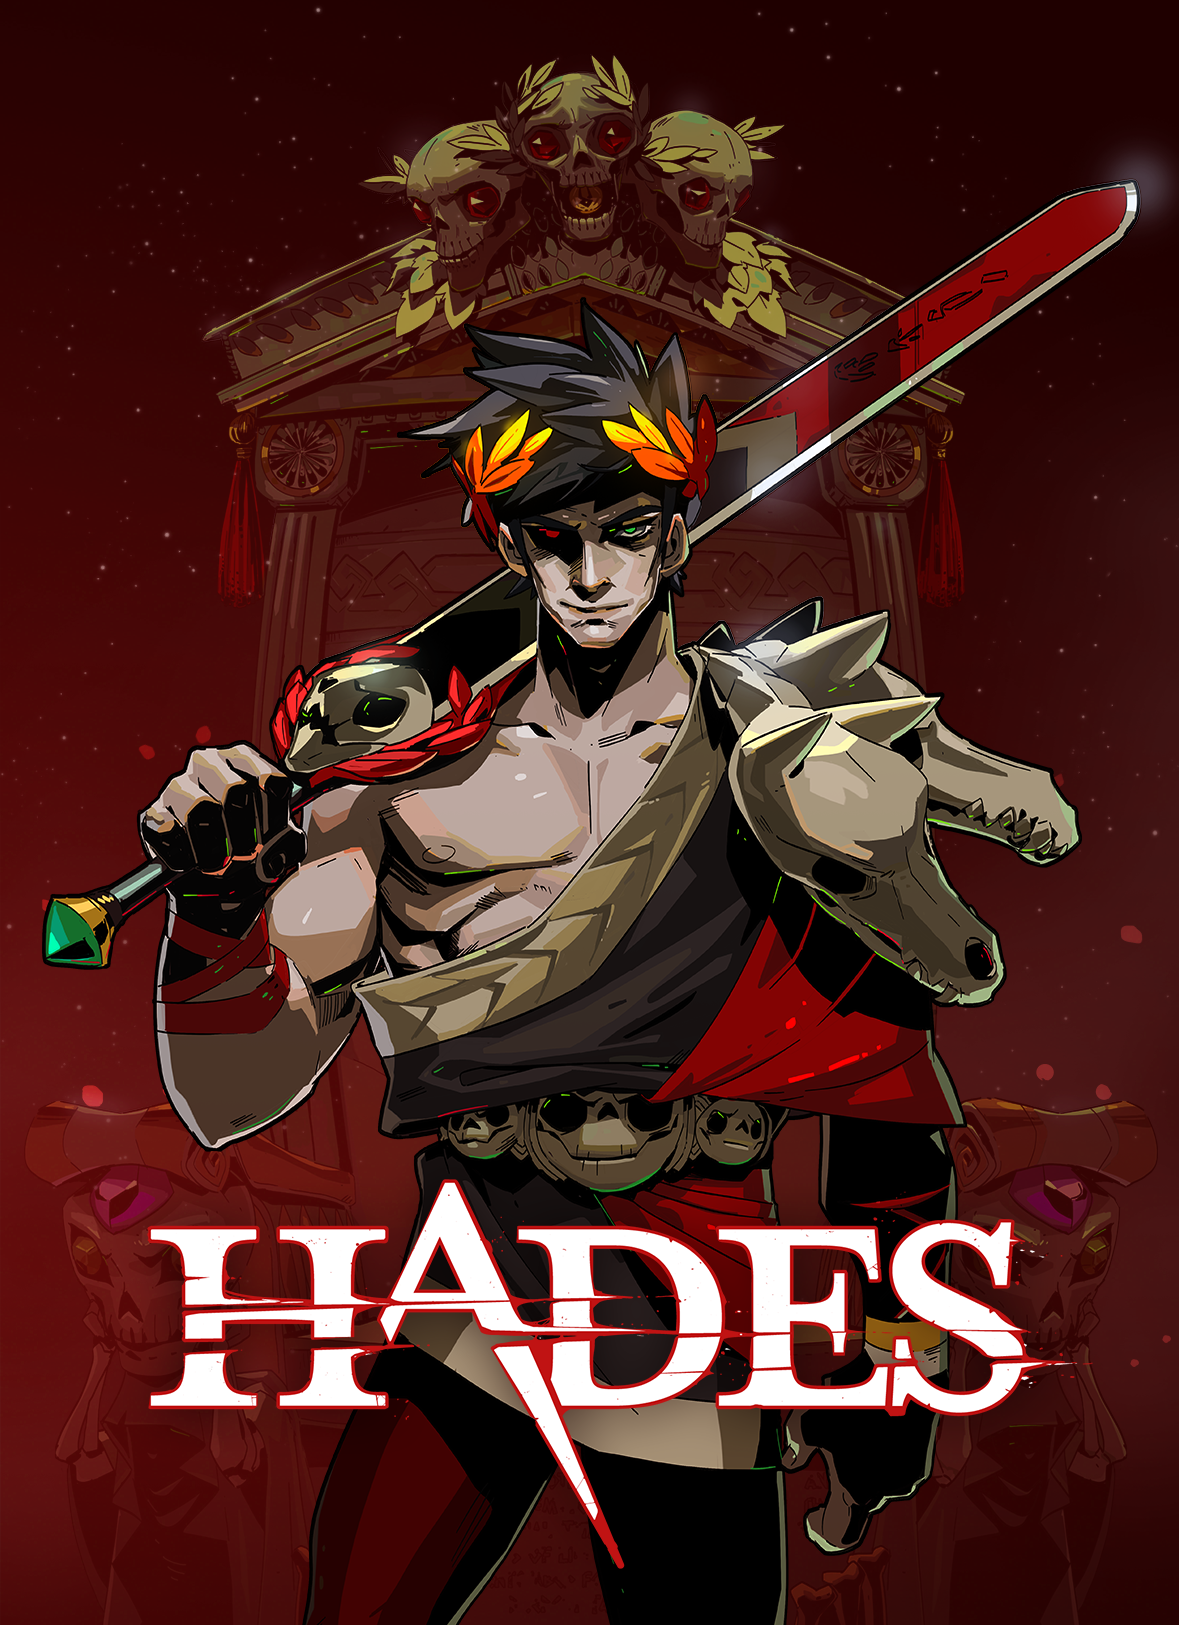 There Is No Escape: On Supergiant’s “Hades”